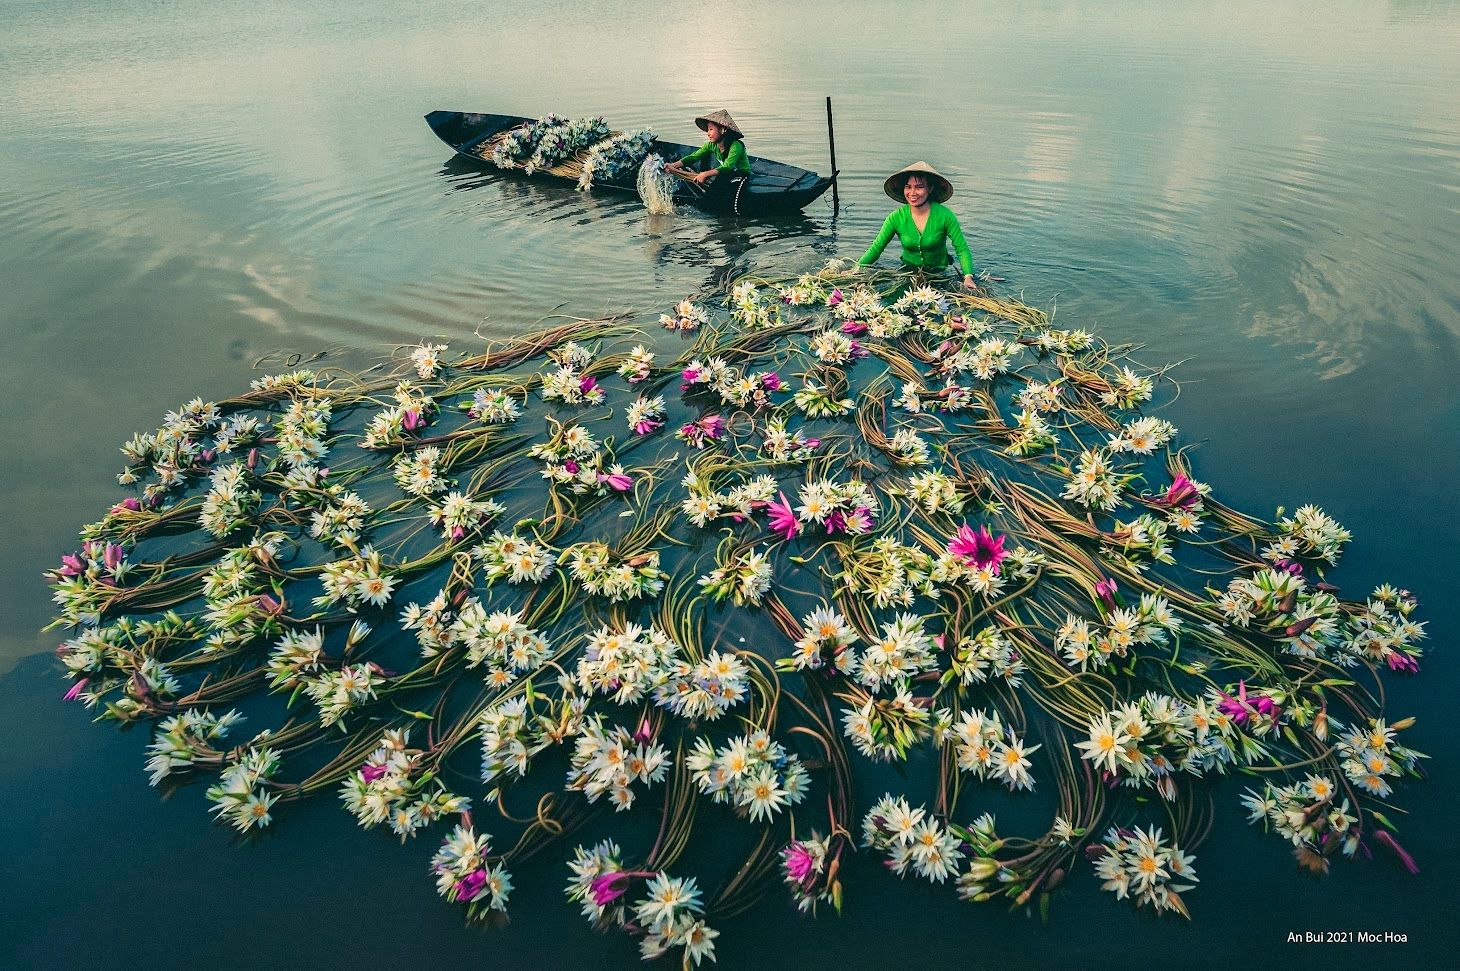 Water lily flowers in Mekong delta